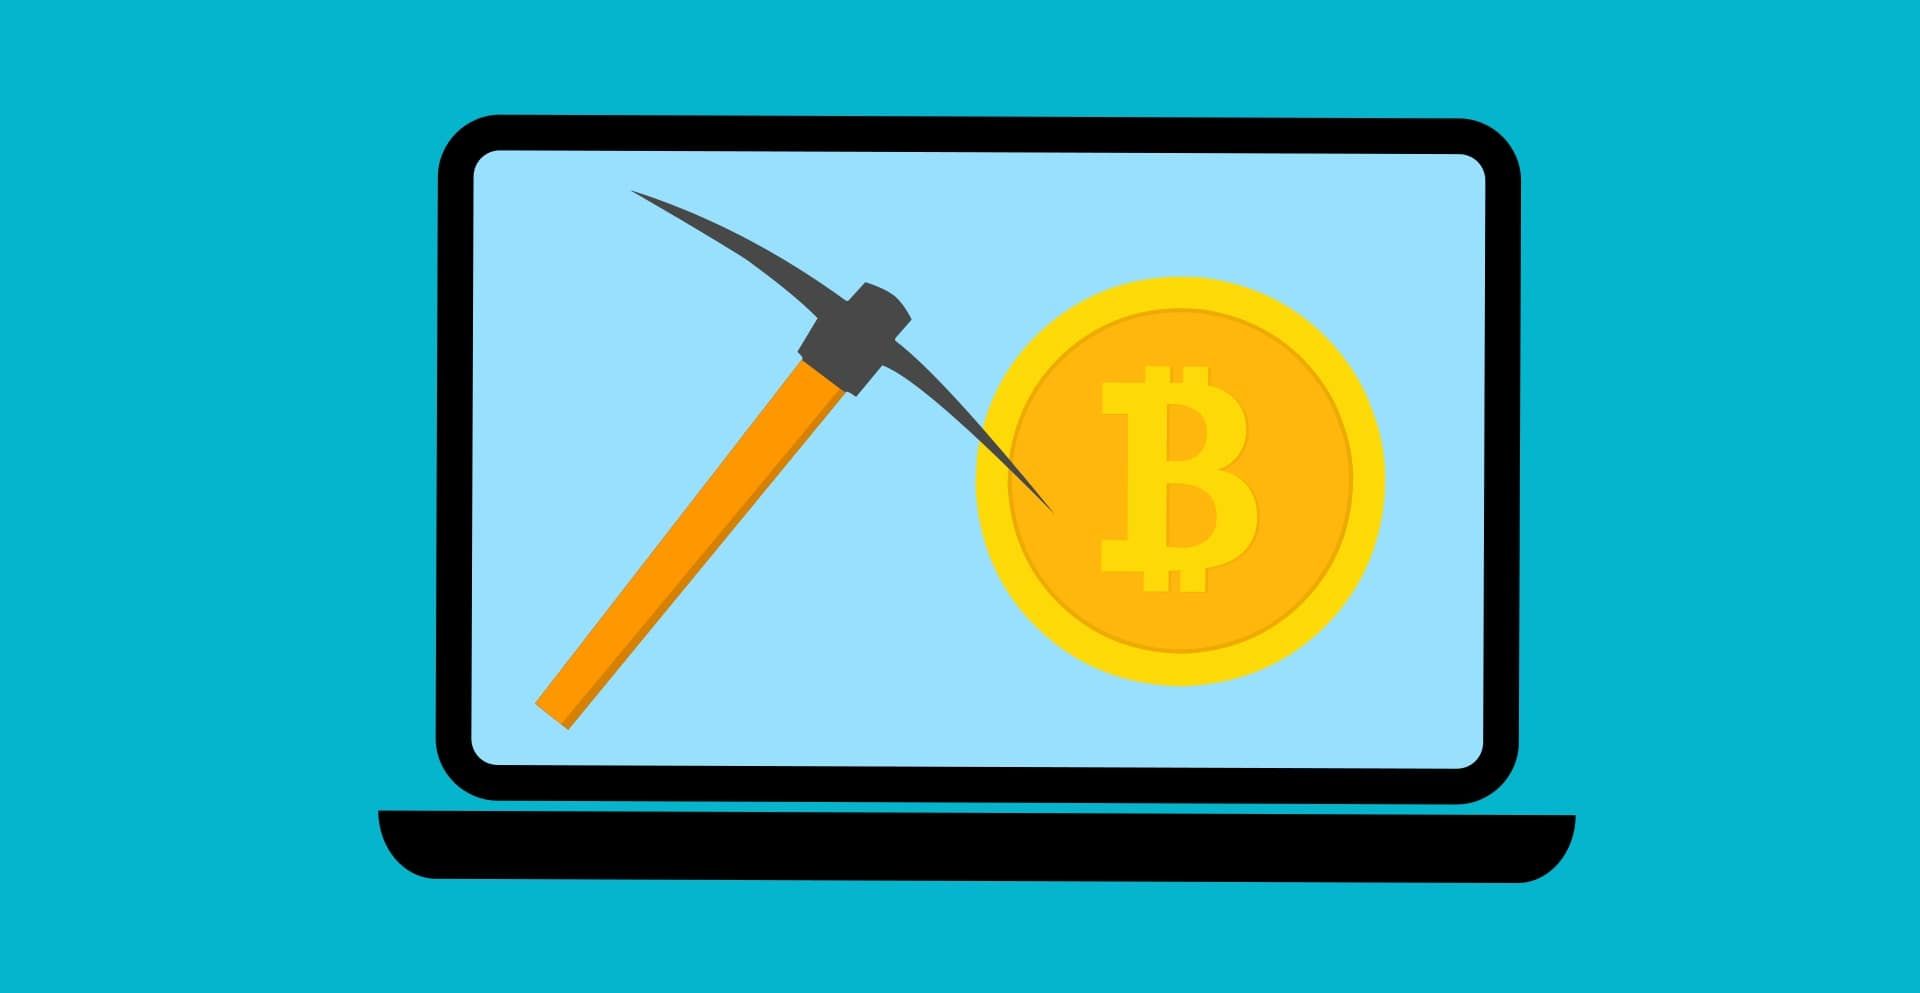 Bitcoin and pickaxe graphic on laptop screen